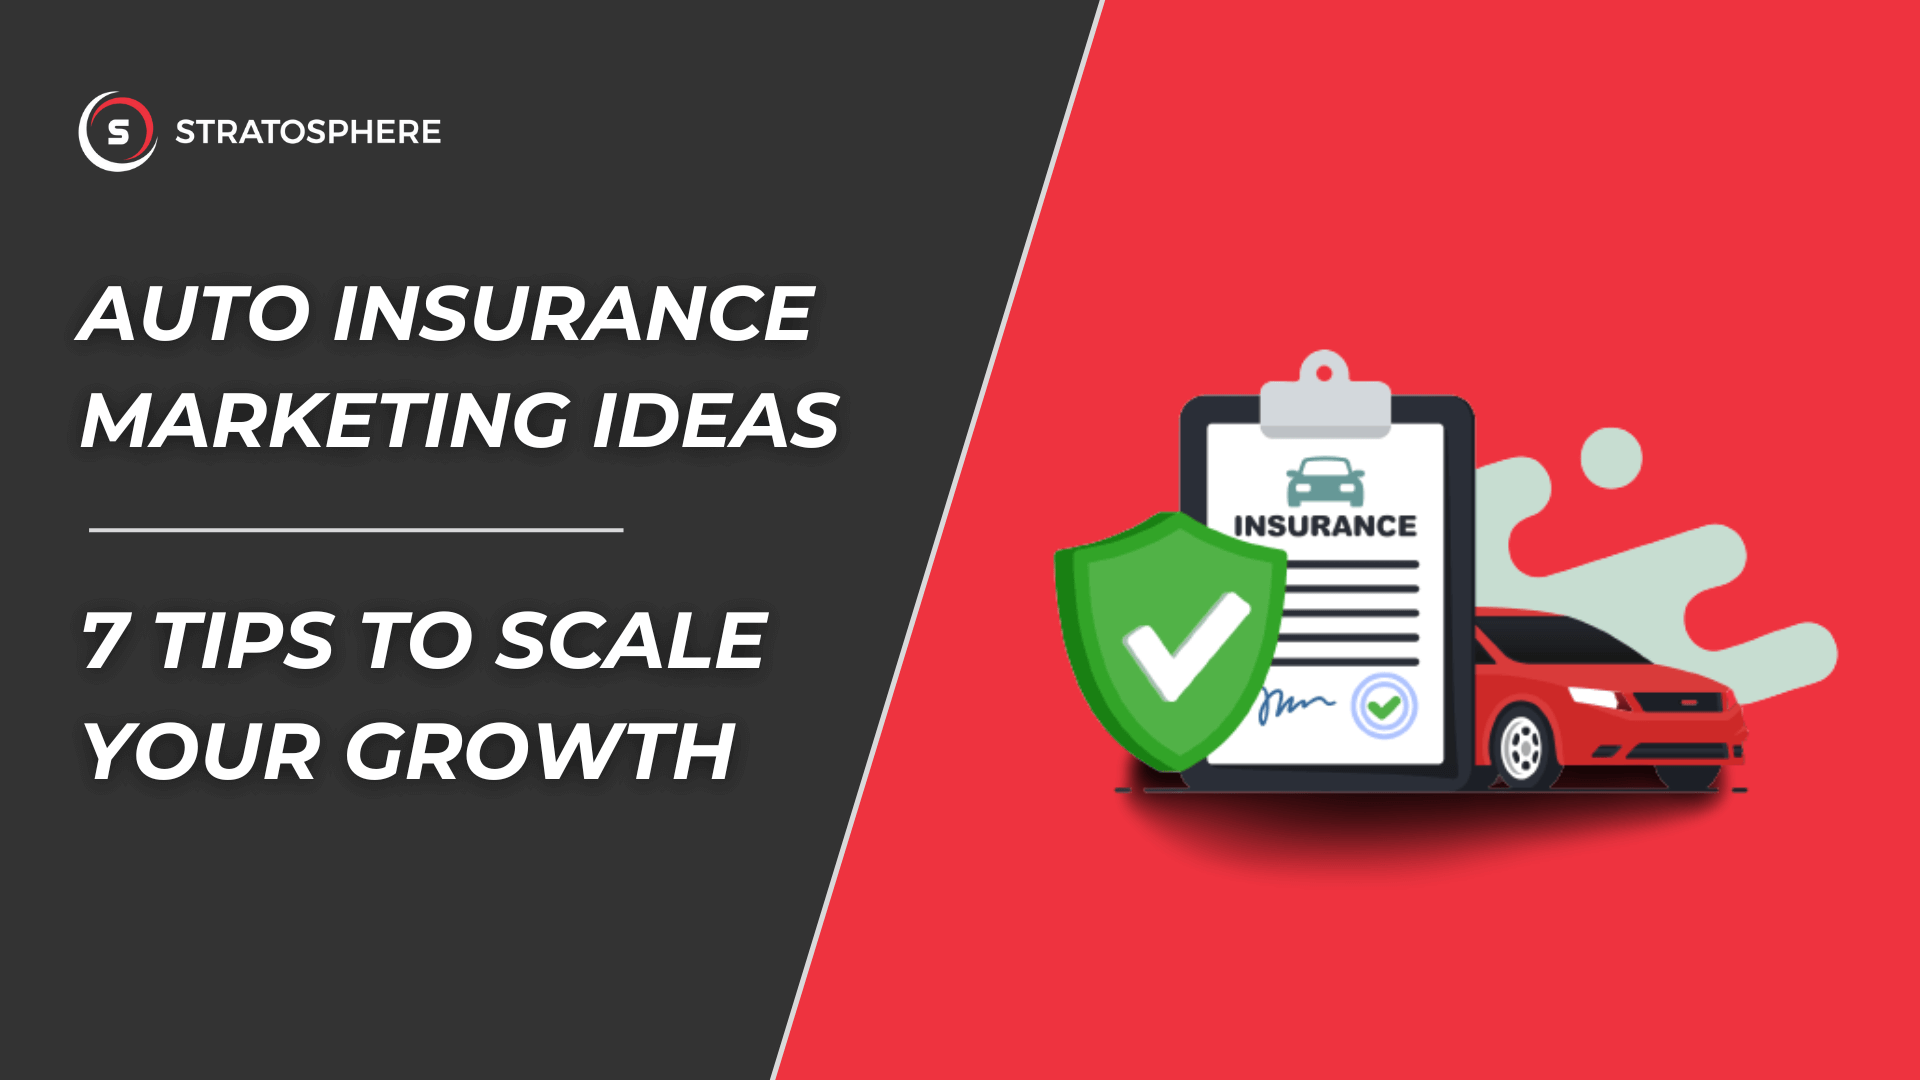 Auto Insurance Marketing Ideas: 7 Tips to Scale Your Growth